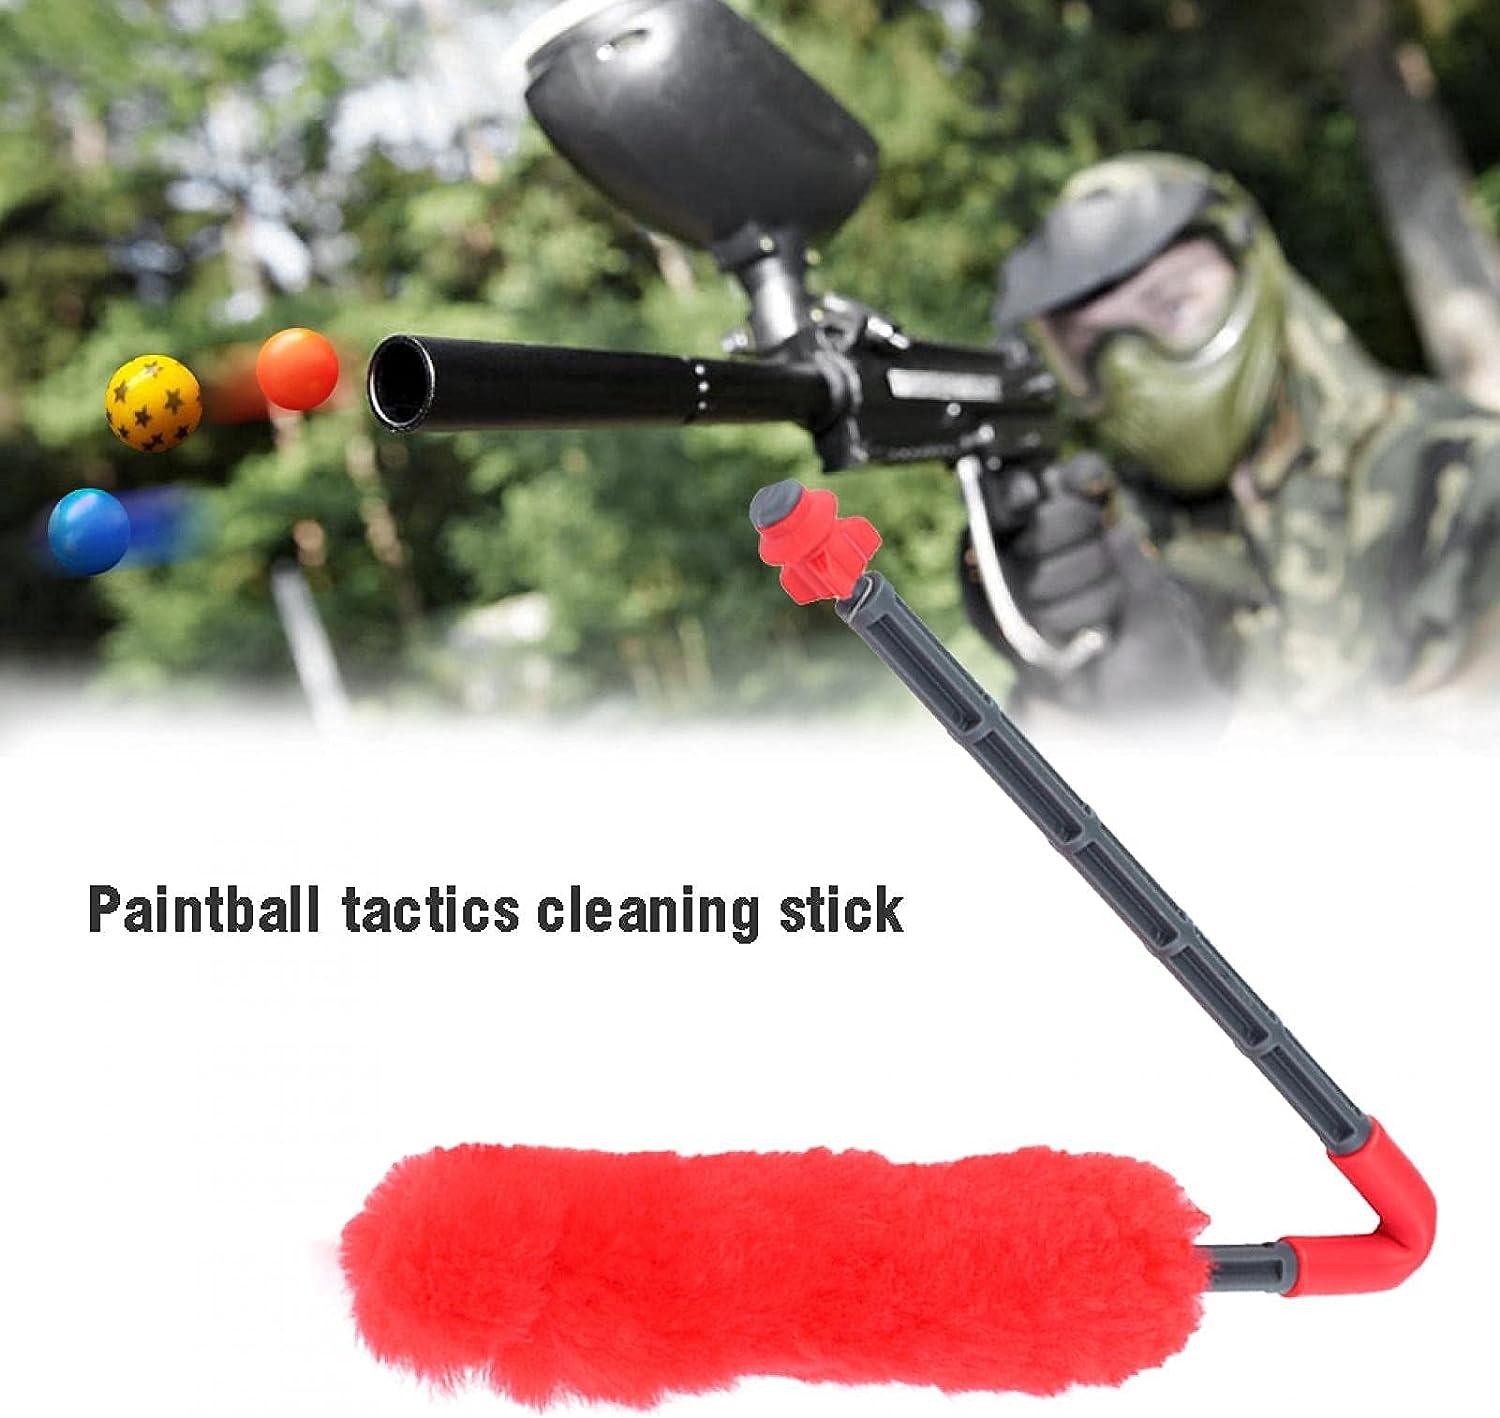 minifinker Paintball Squeegee, Absorbent Swab Paintball Stick Absorb Residual Paint for Clean Barrel for Shooting Game Red